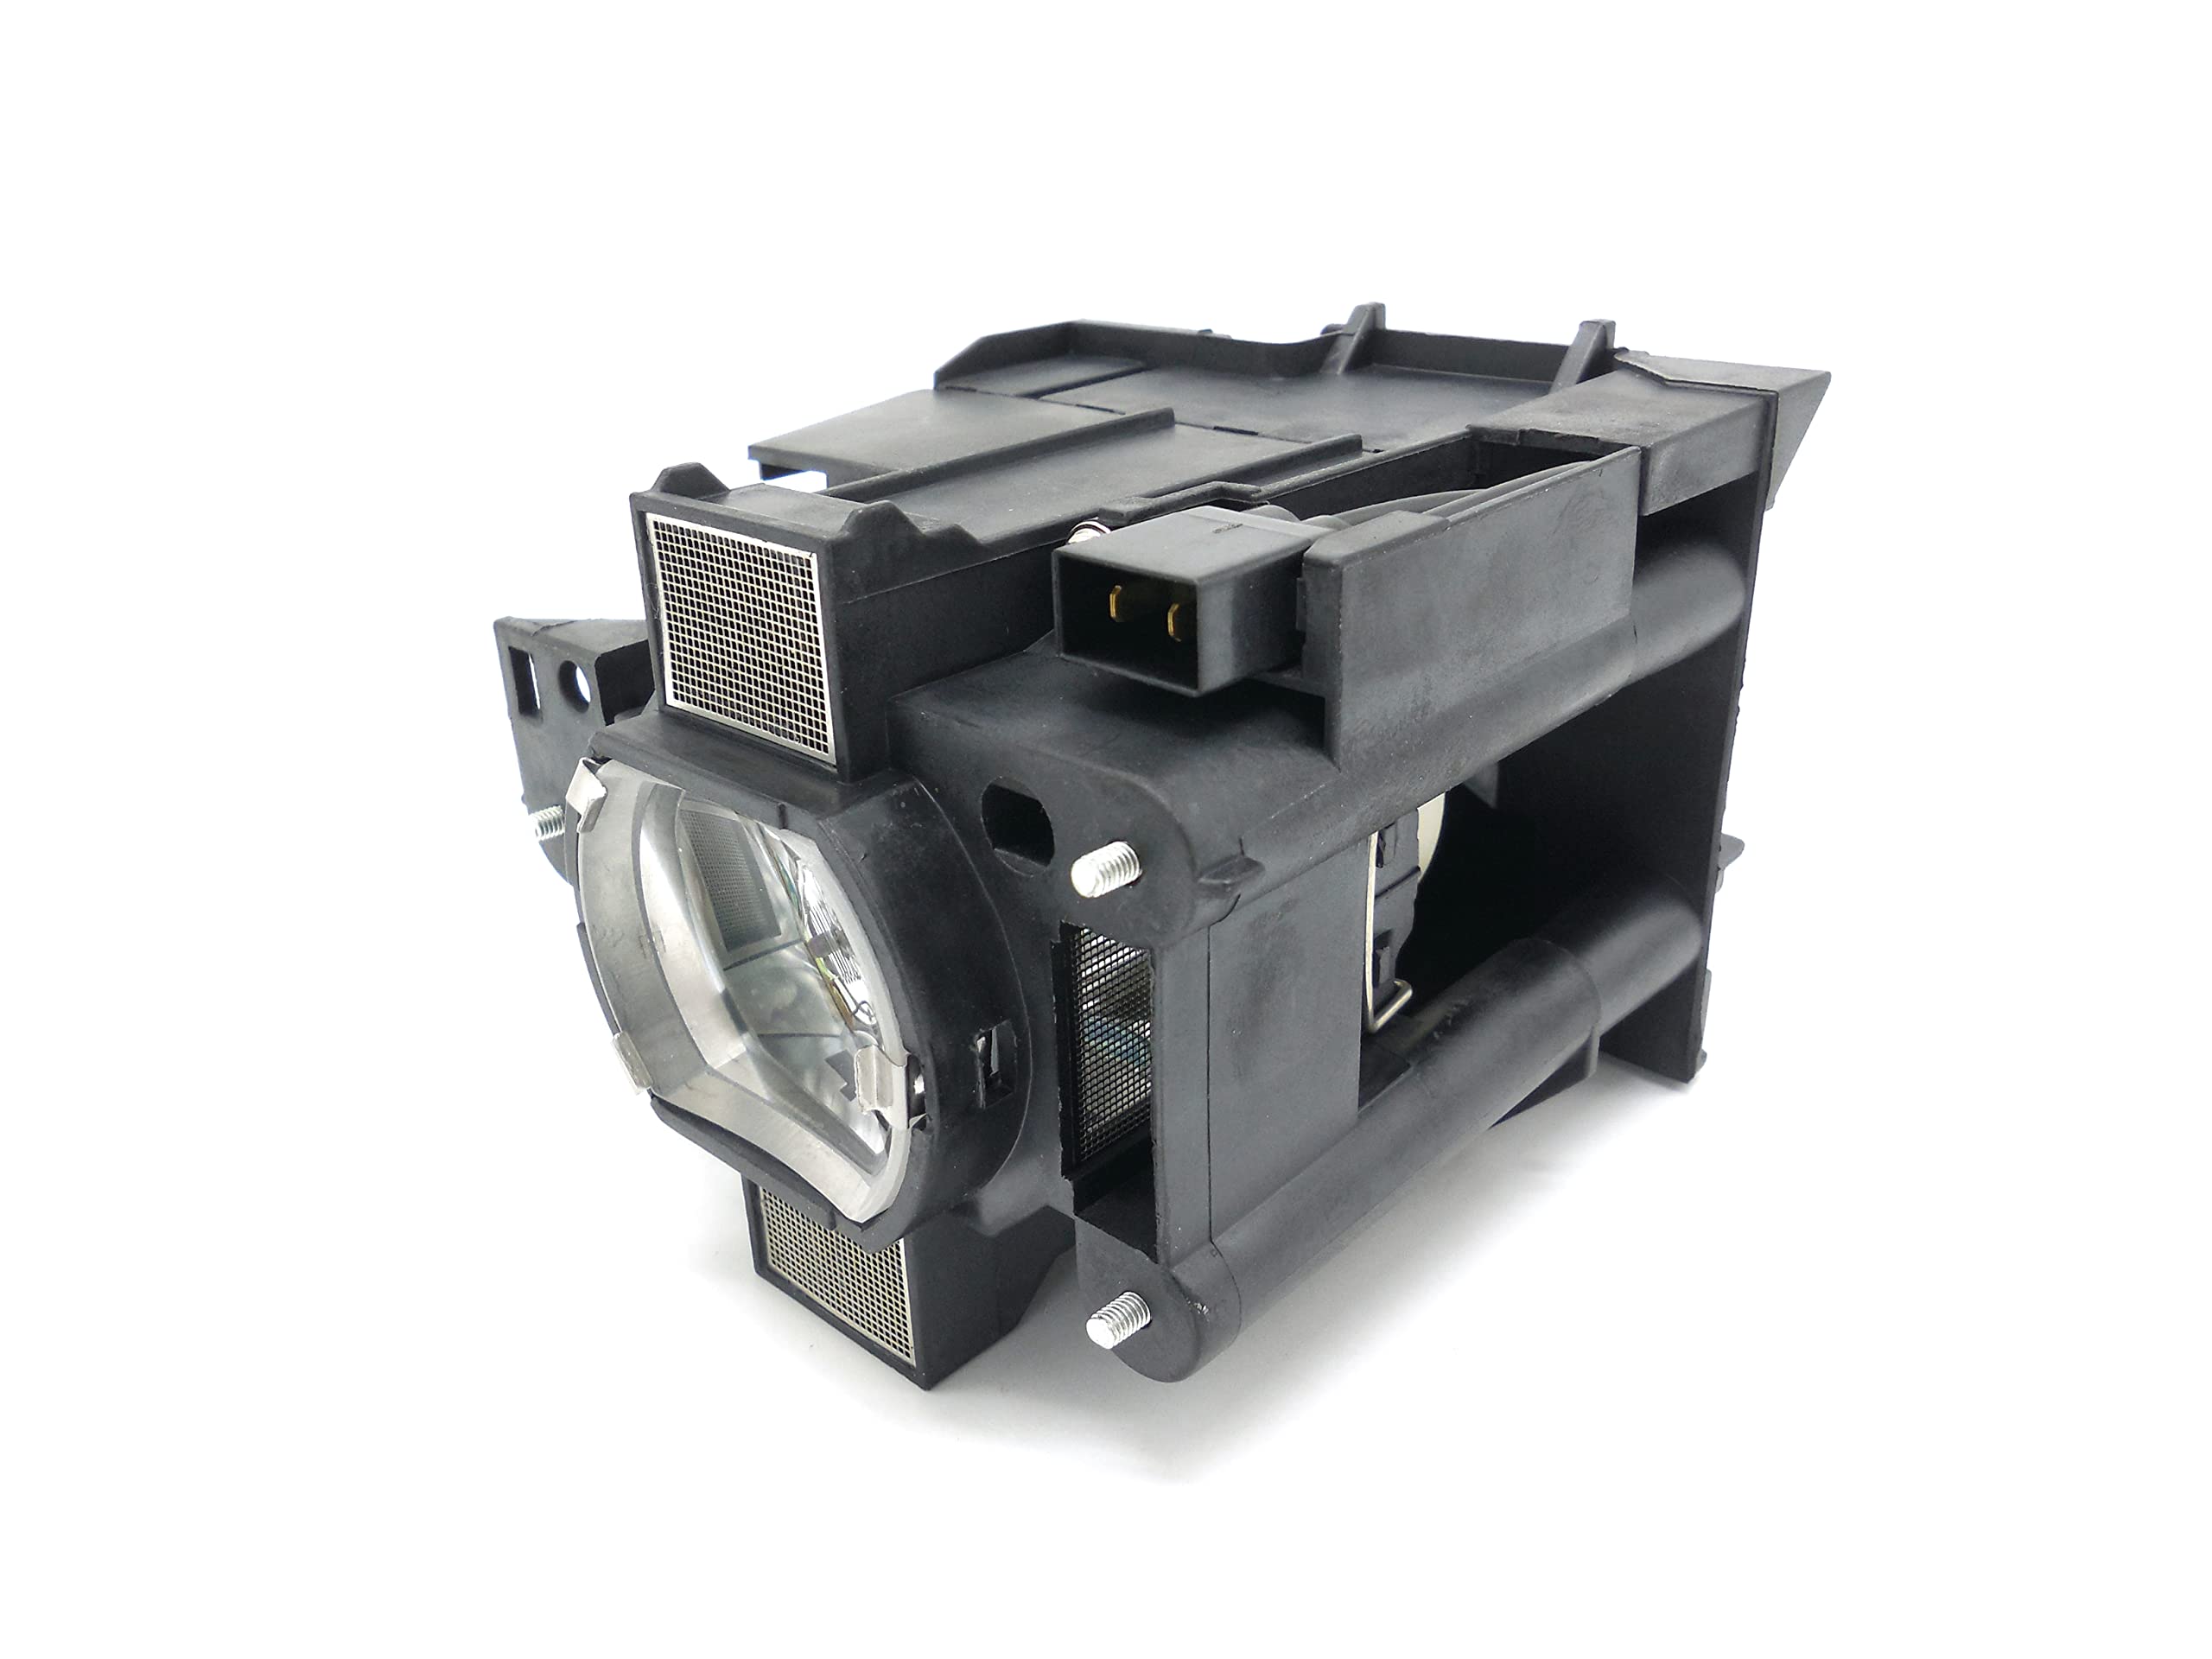 Emazne OEM DT01291 Projector Lamp Genuine Original Bulb with Housing for SP-LAMP-081 Hitachi:CP-WU8450 CP-WU8451/CP-WUX8450/CP-WX8255/CP-WX8255A/CP-X8160 InFocus IN5142/IN5144/IN5145/ IN5144A